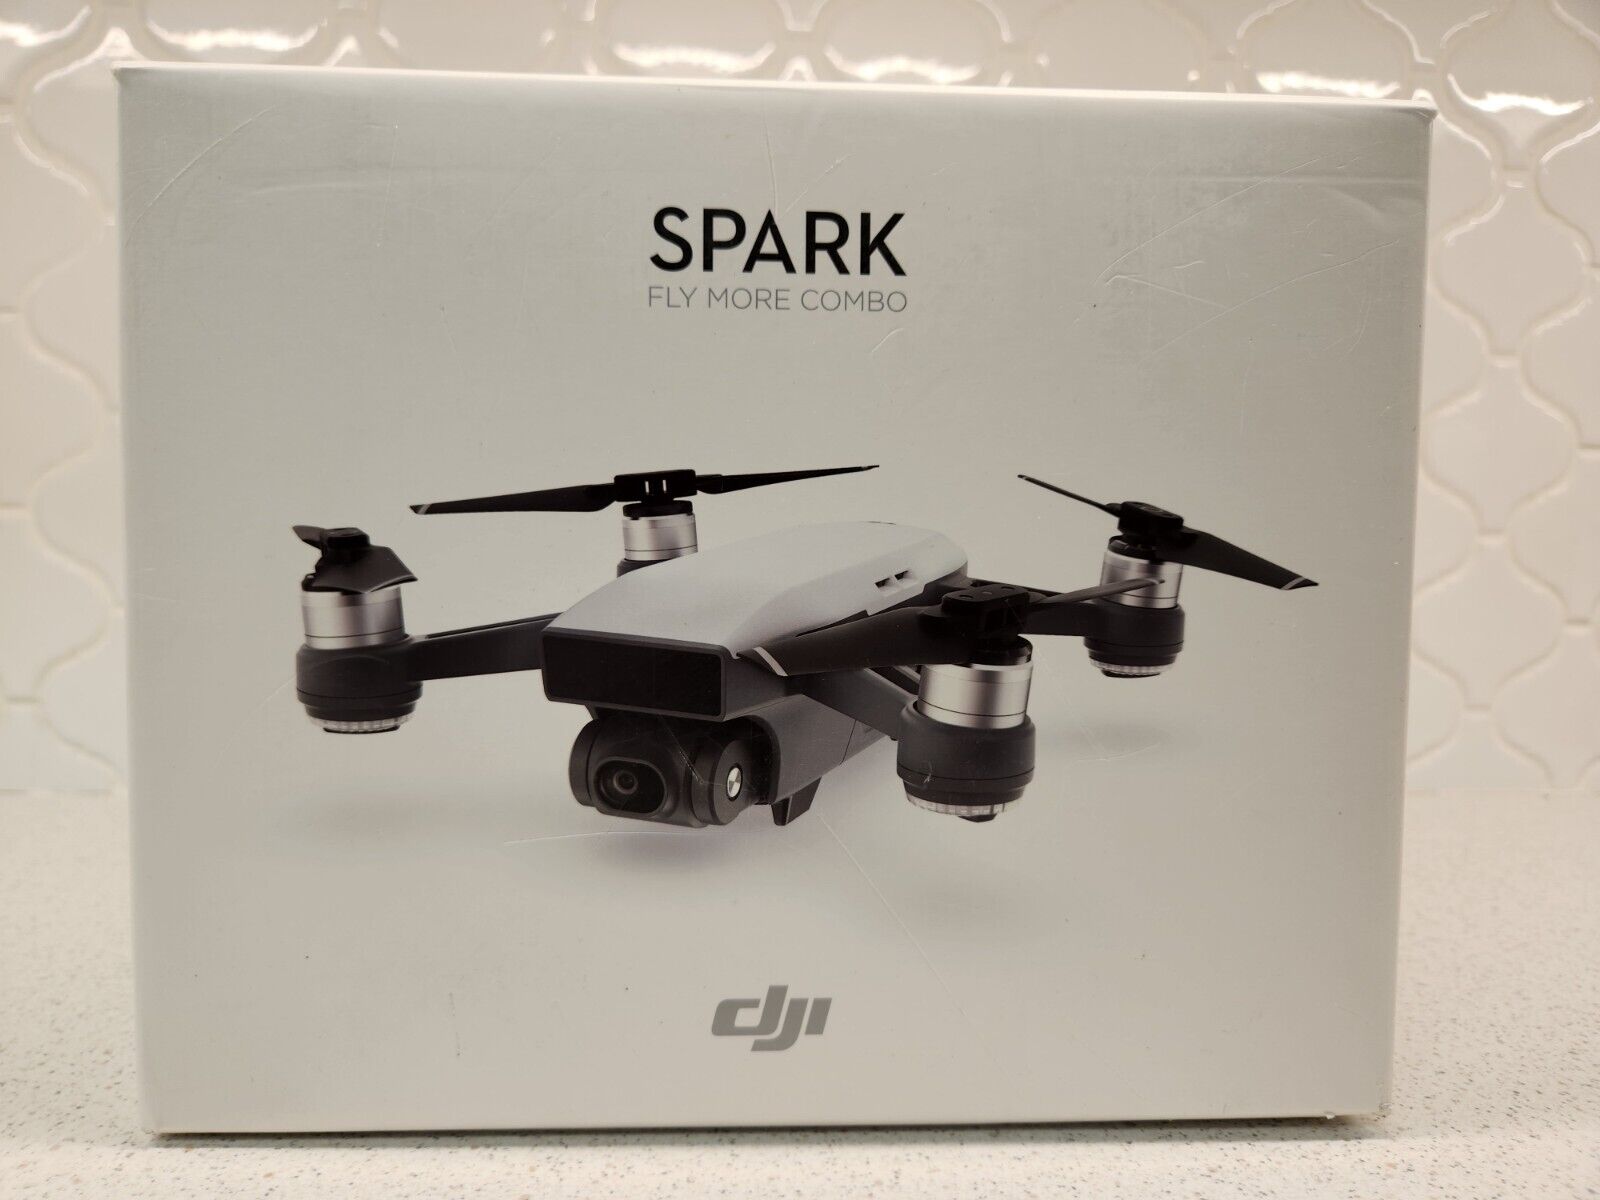 DJI Spark Fly More Combo 1080p Camera Drone - White (CP.PT.000899 ...